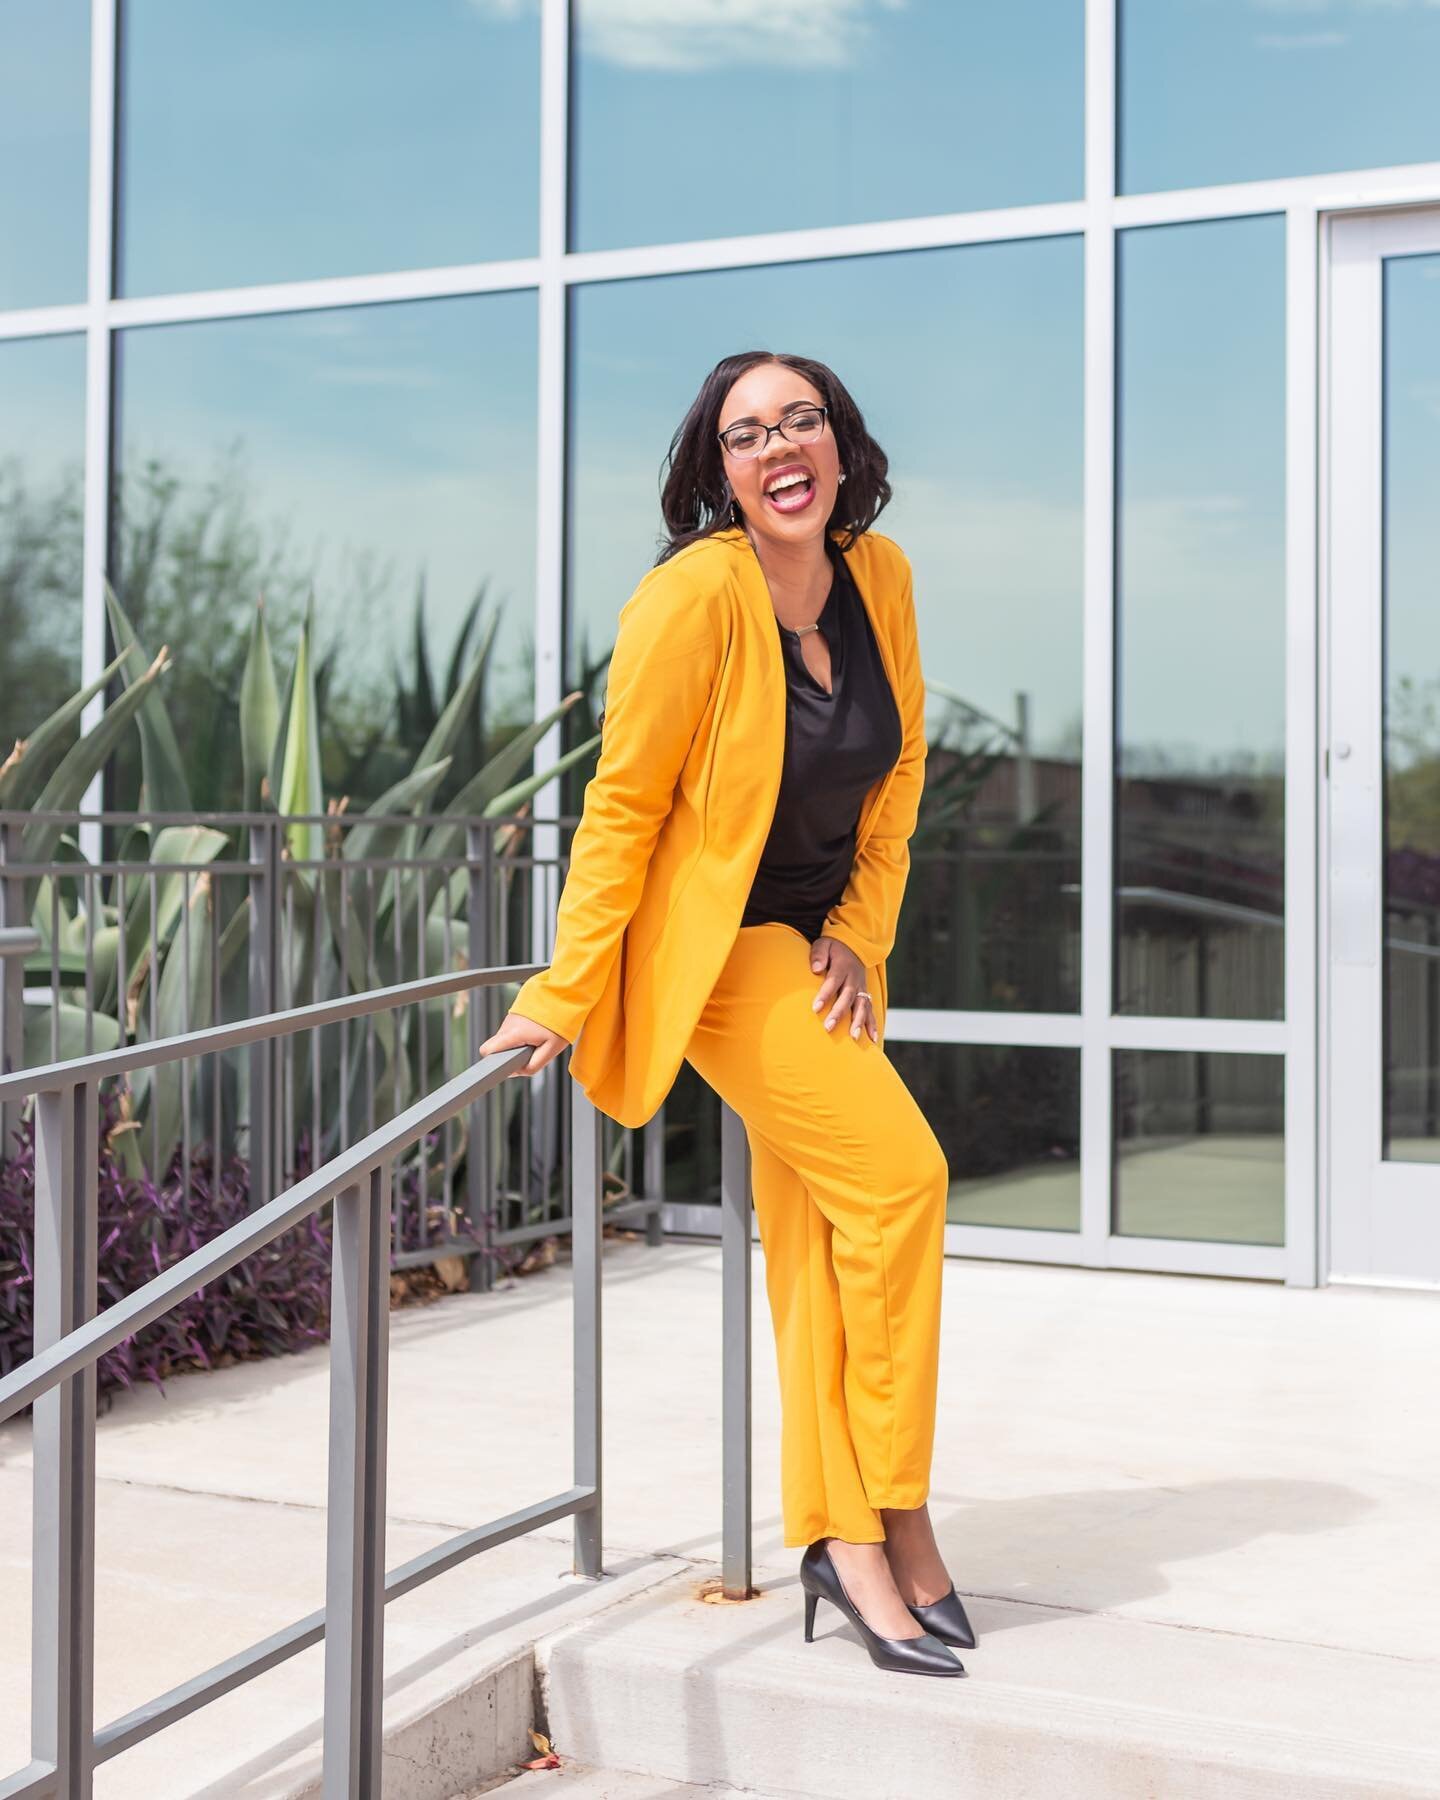 This amazing yellow suit is the ultimate mood booster if you ask me. Especially when paired with the infectious laugh of @tychastake! 😍 📸Taken in Austin in March. I miss photographing people!